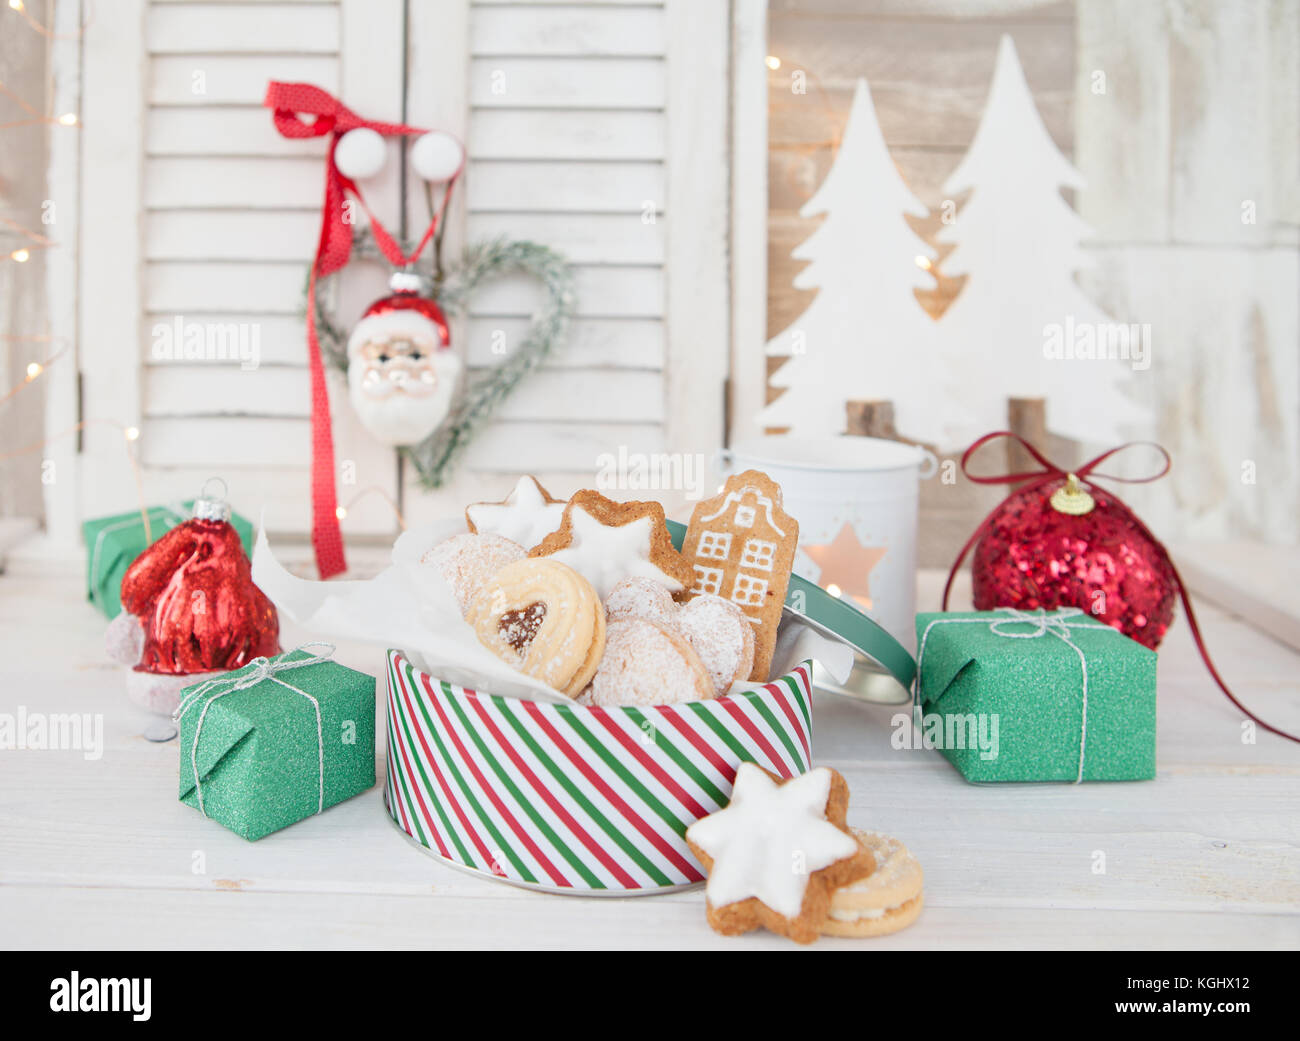 Cookie Jar With Christmas Cookies And Decorations Stock Photo Alamy